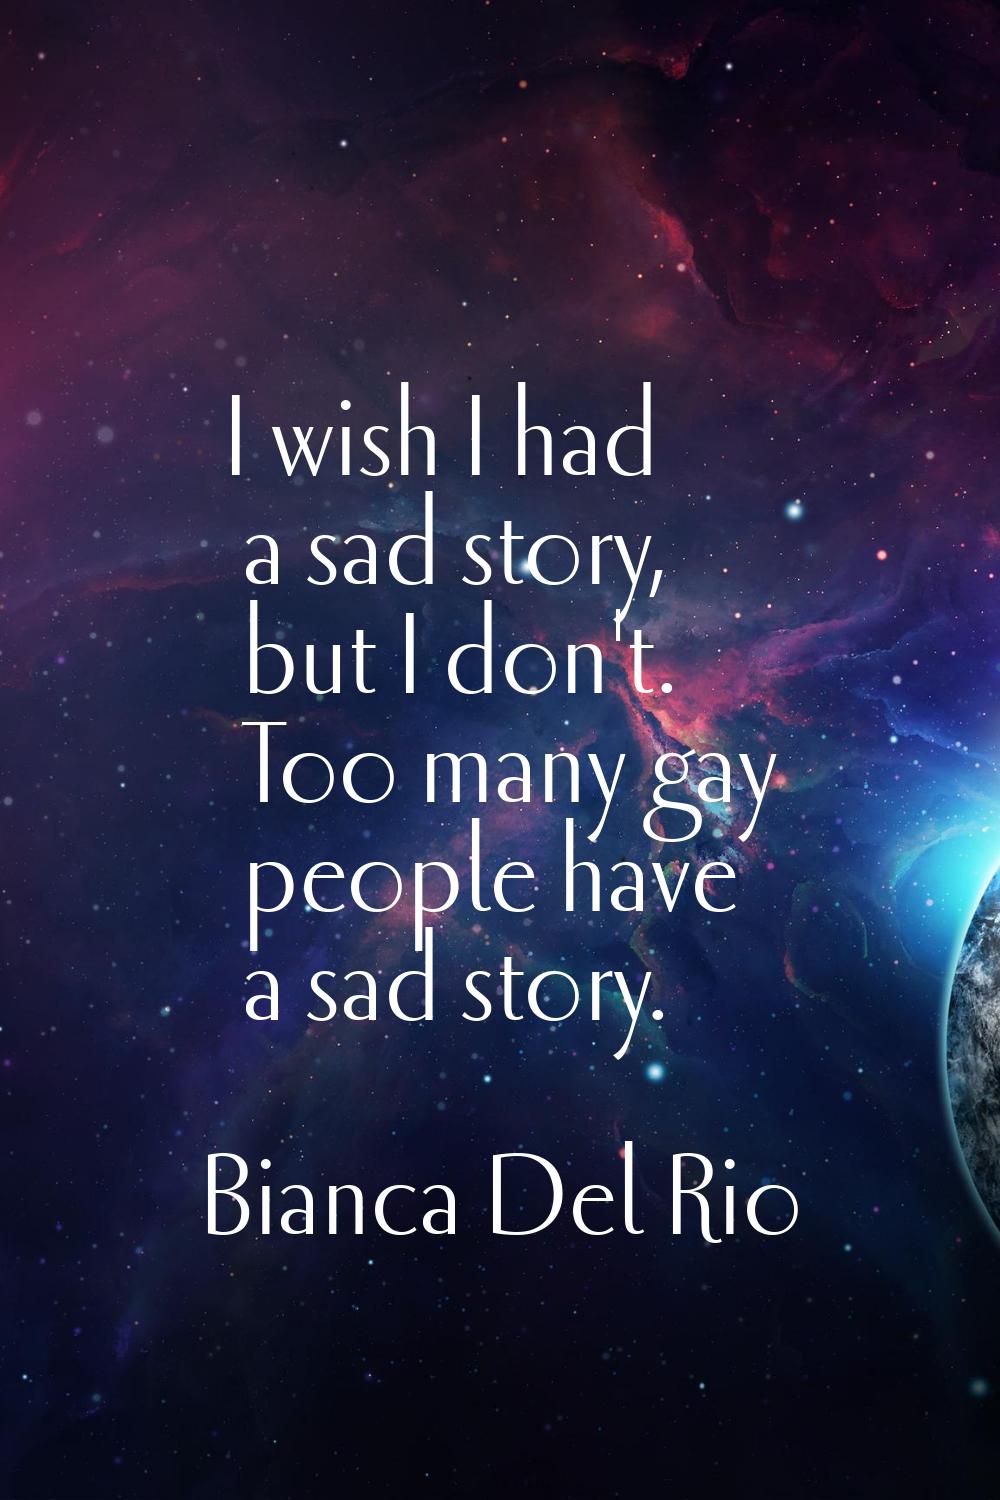 I wish I had a sad story, but I don't. Too many gay people have a sad story.